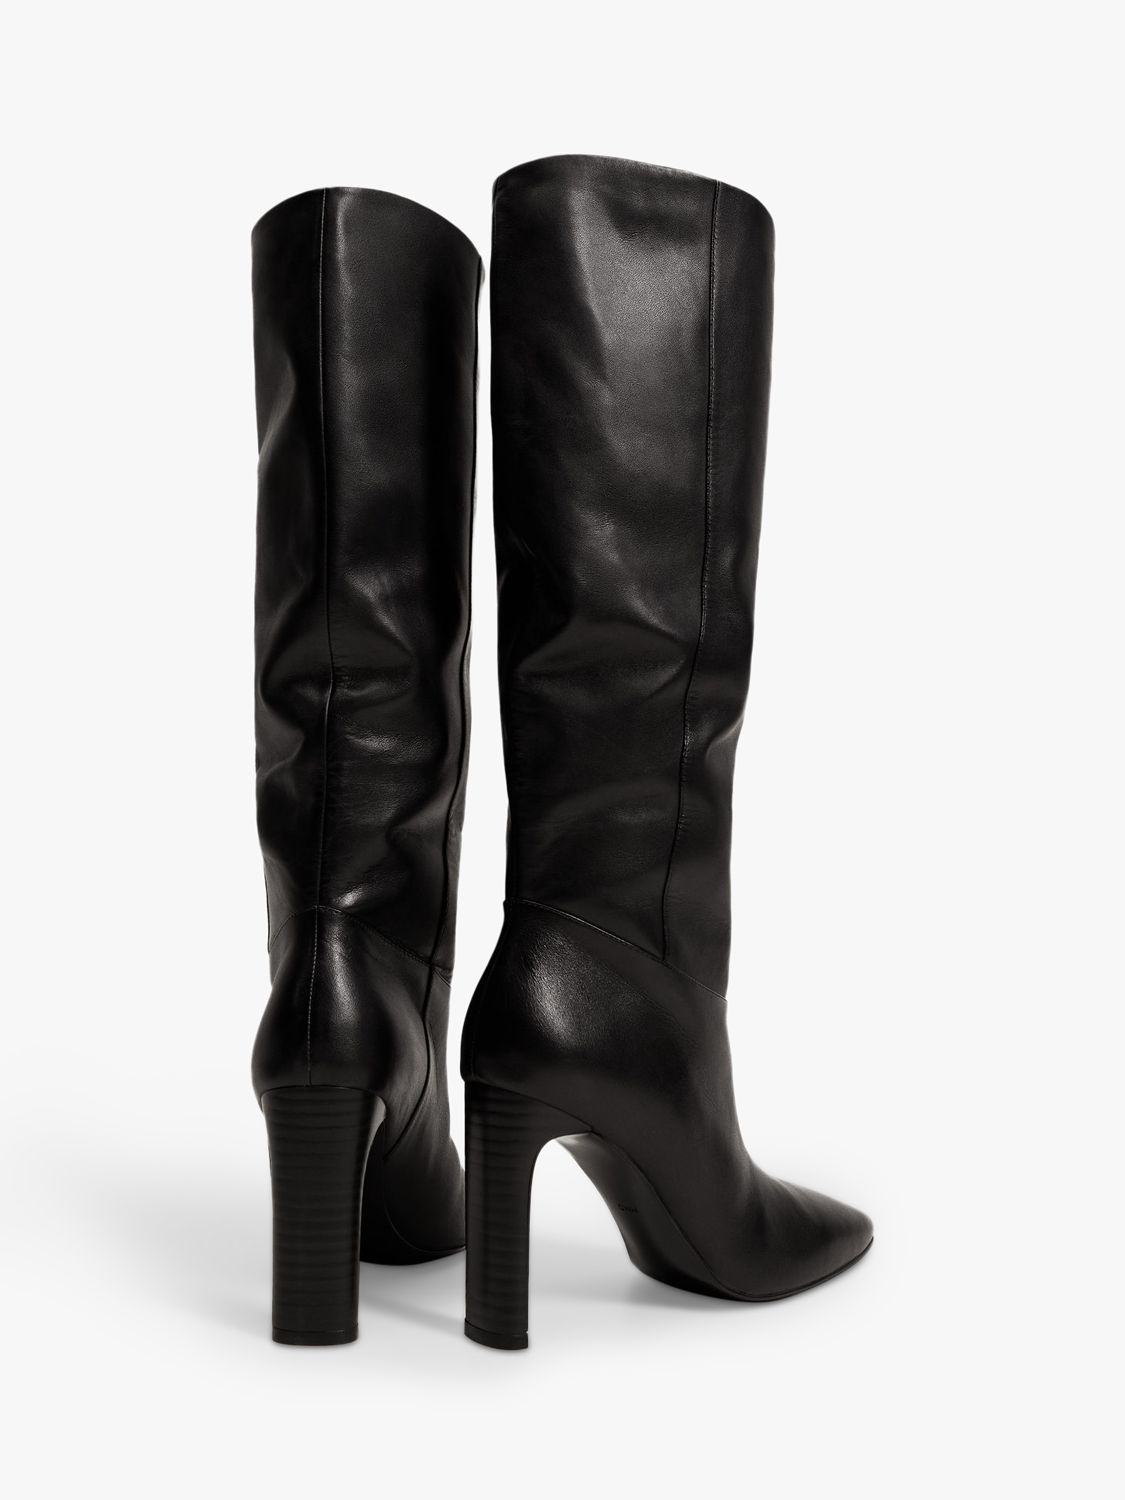 Mango Campo Leather Knee High Boots, Black, 2